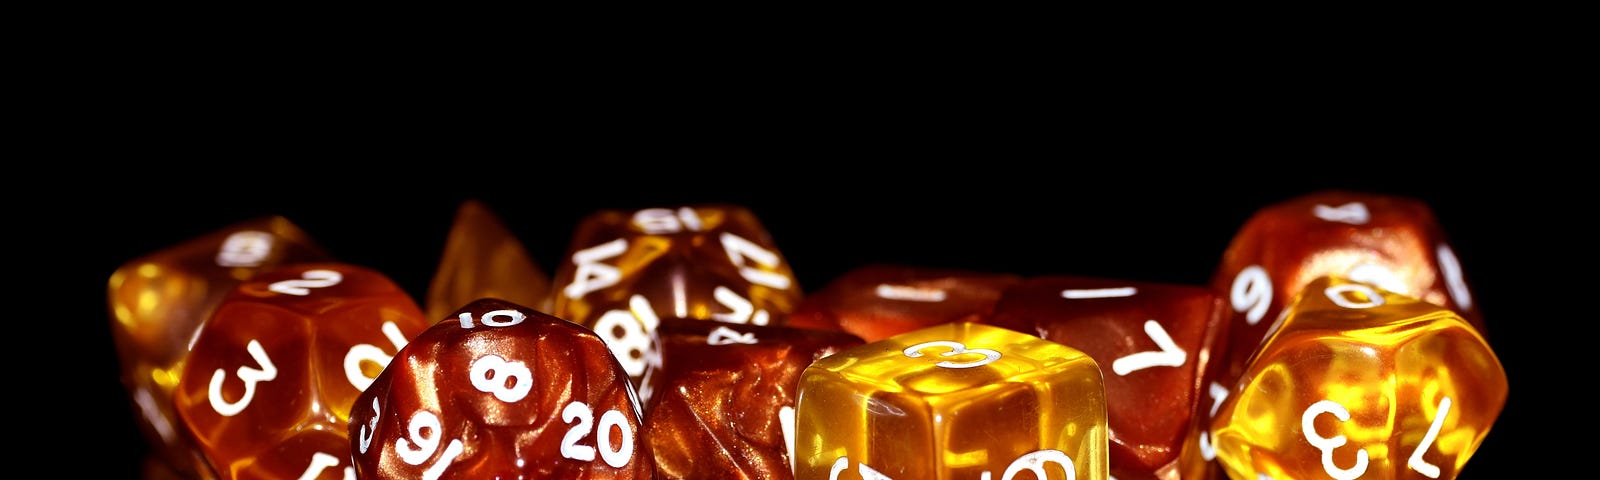 amber-colored dice on a black background